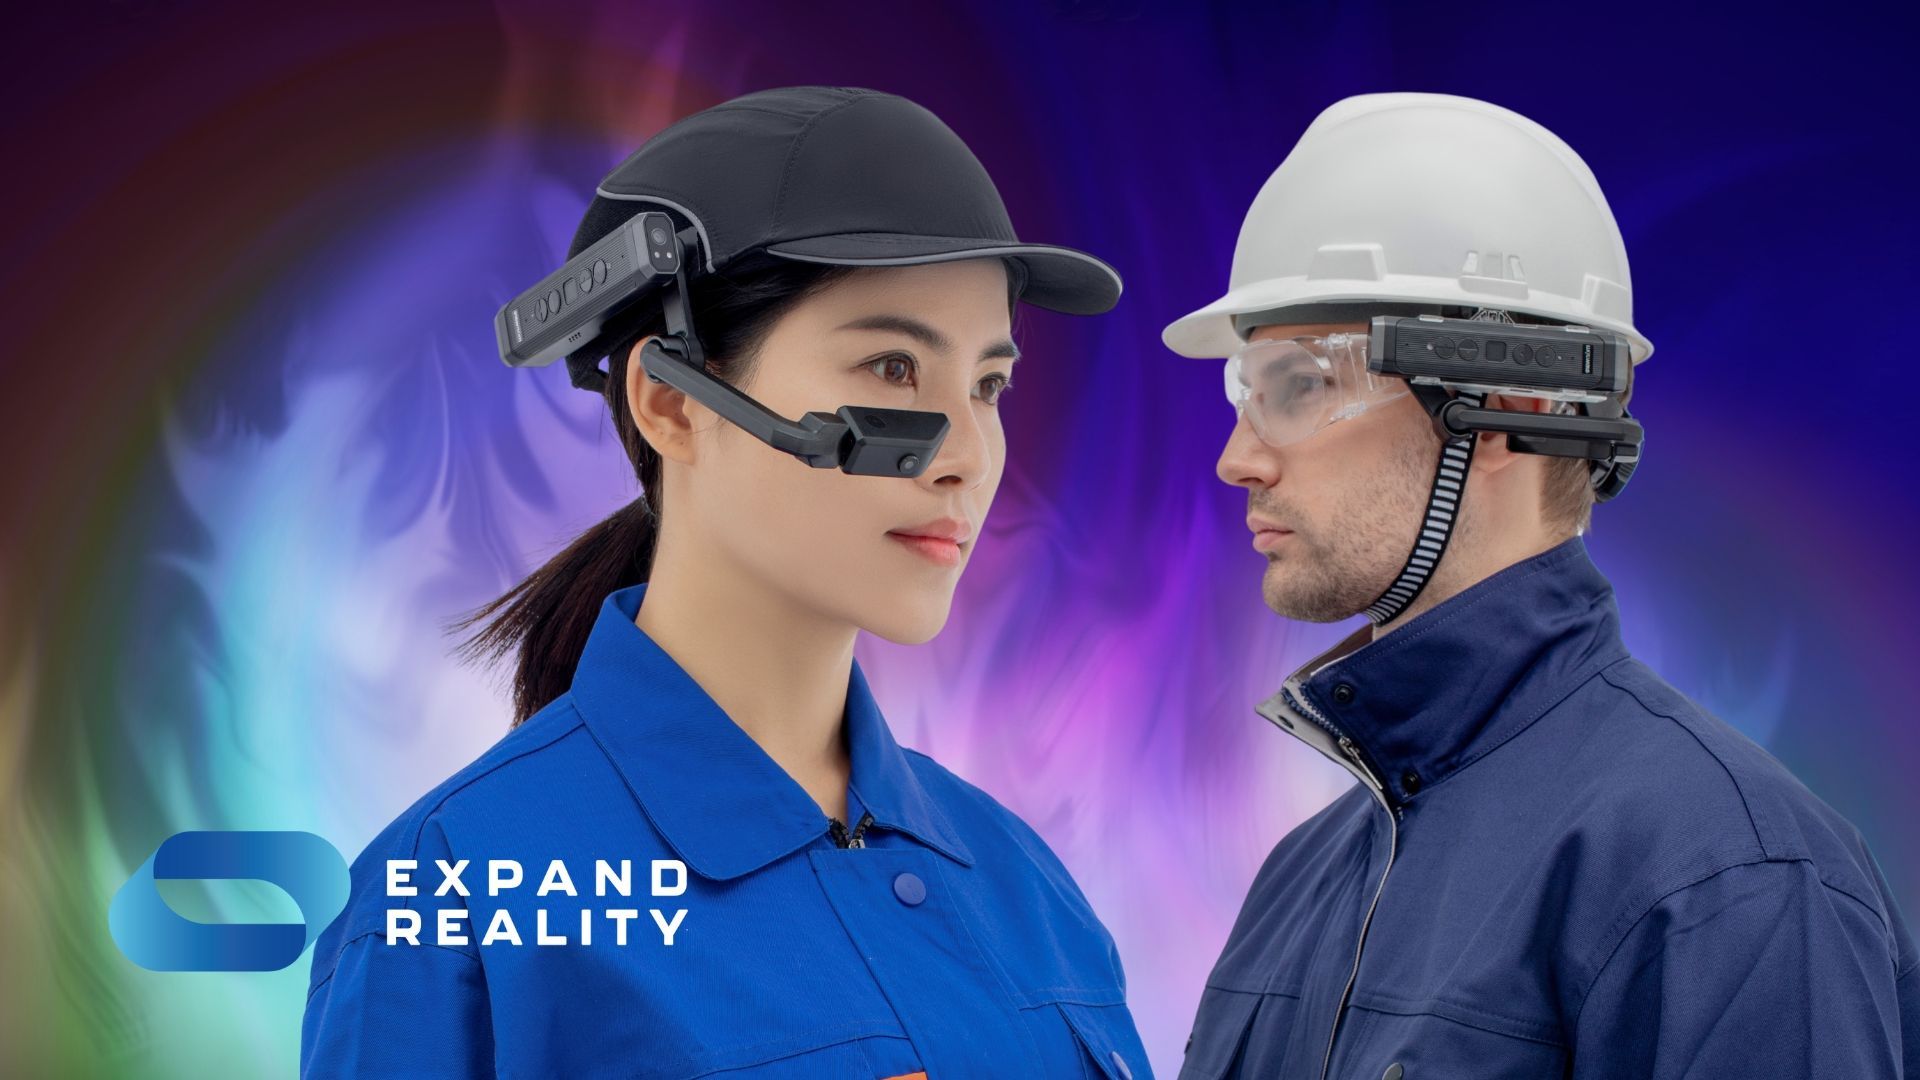 The mōziware cimō is an innovative aR headset with huge potential for businesses. Join us as we explore its feature-packed operating system, Infinity OS.